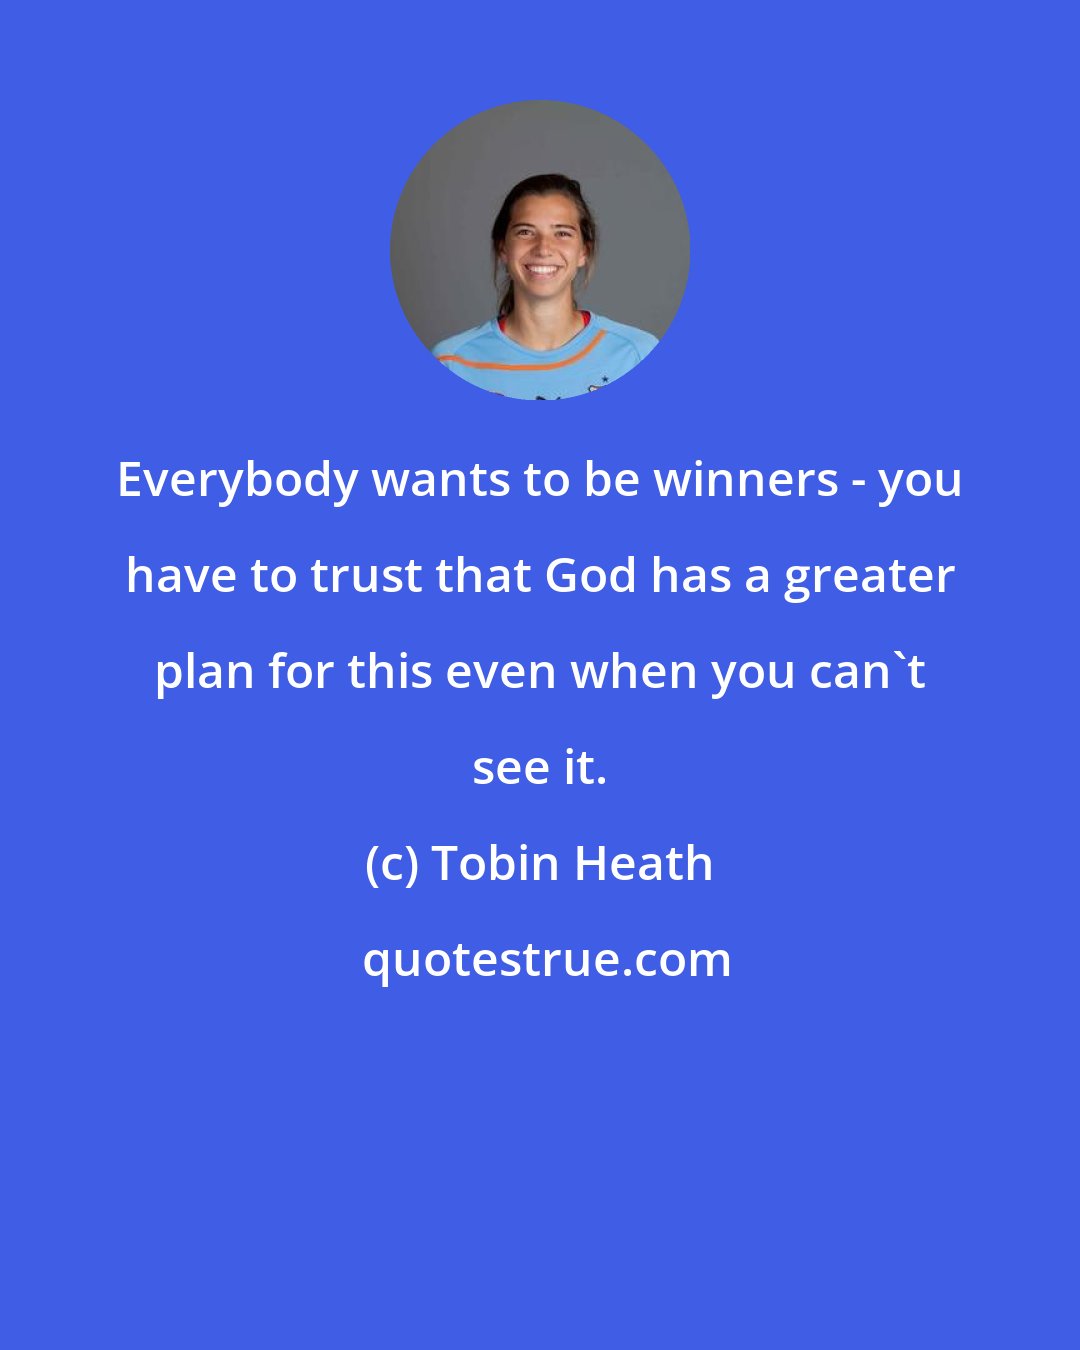 Tobin Heath: Everybody wants to be winners - you have to trust that God has a greater plan for this even when you can't see it.